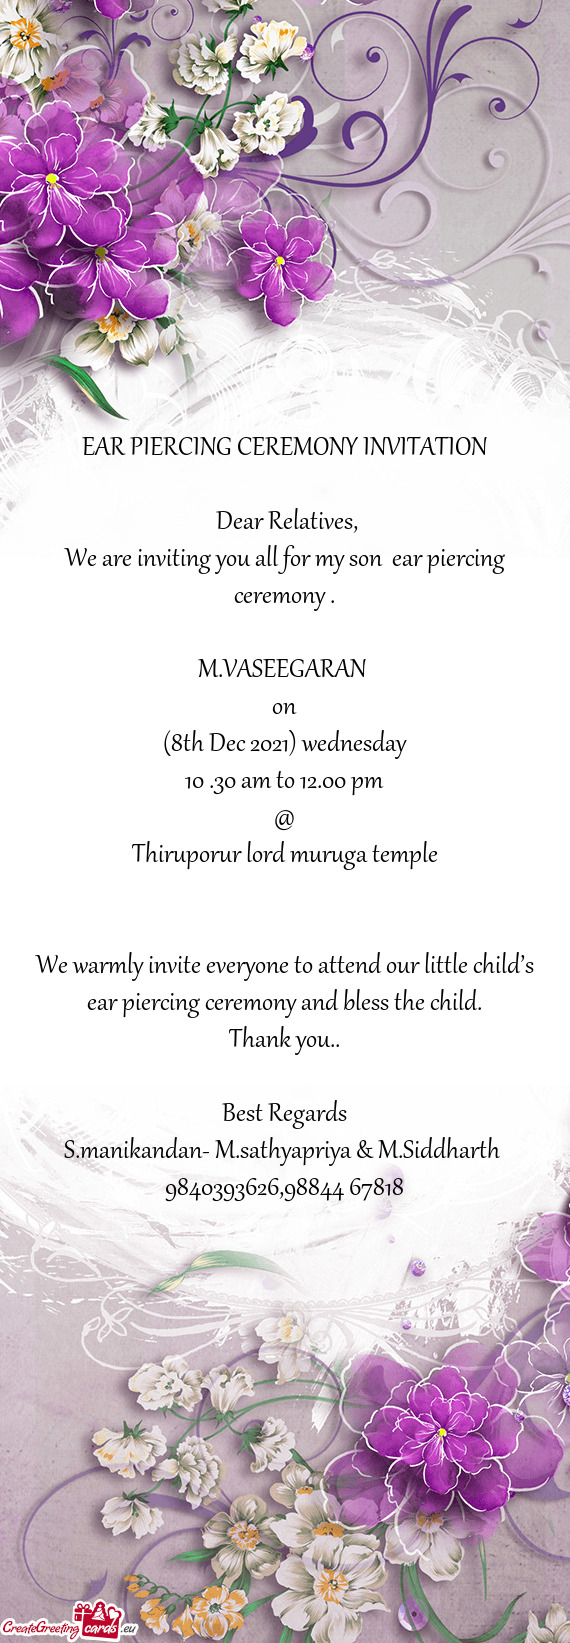 We warmly invite everyone to attend our little child’s ear piercing ceremony and bless the child